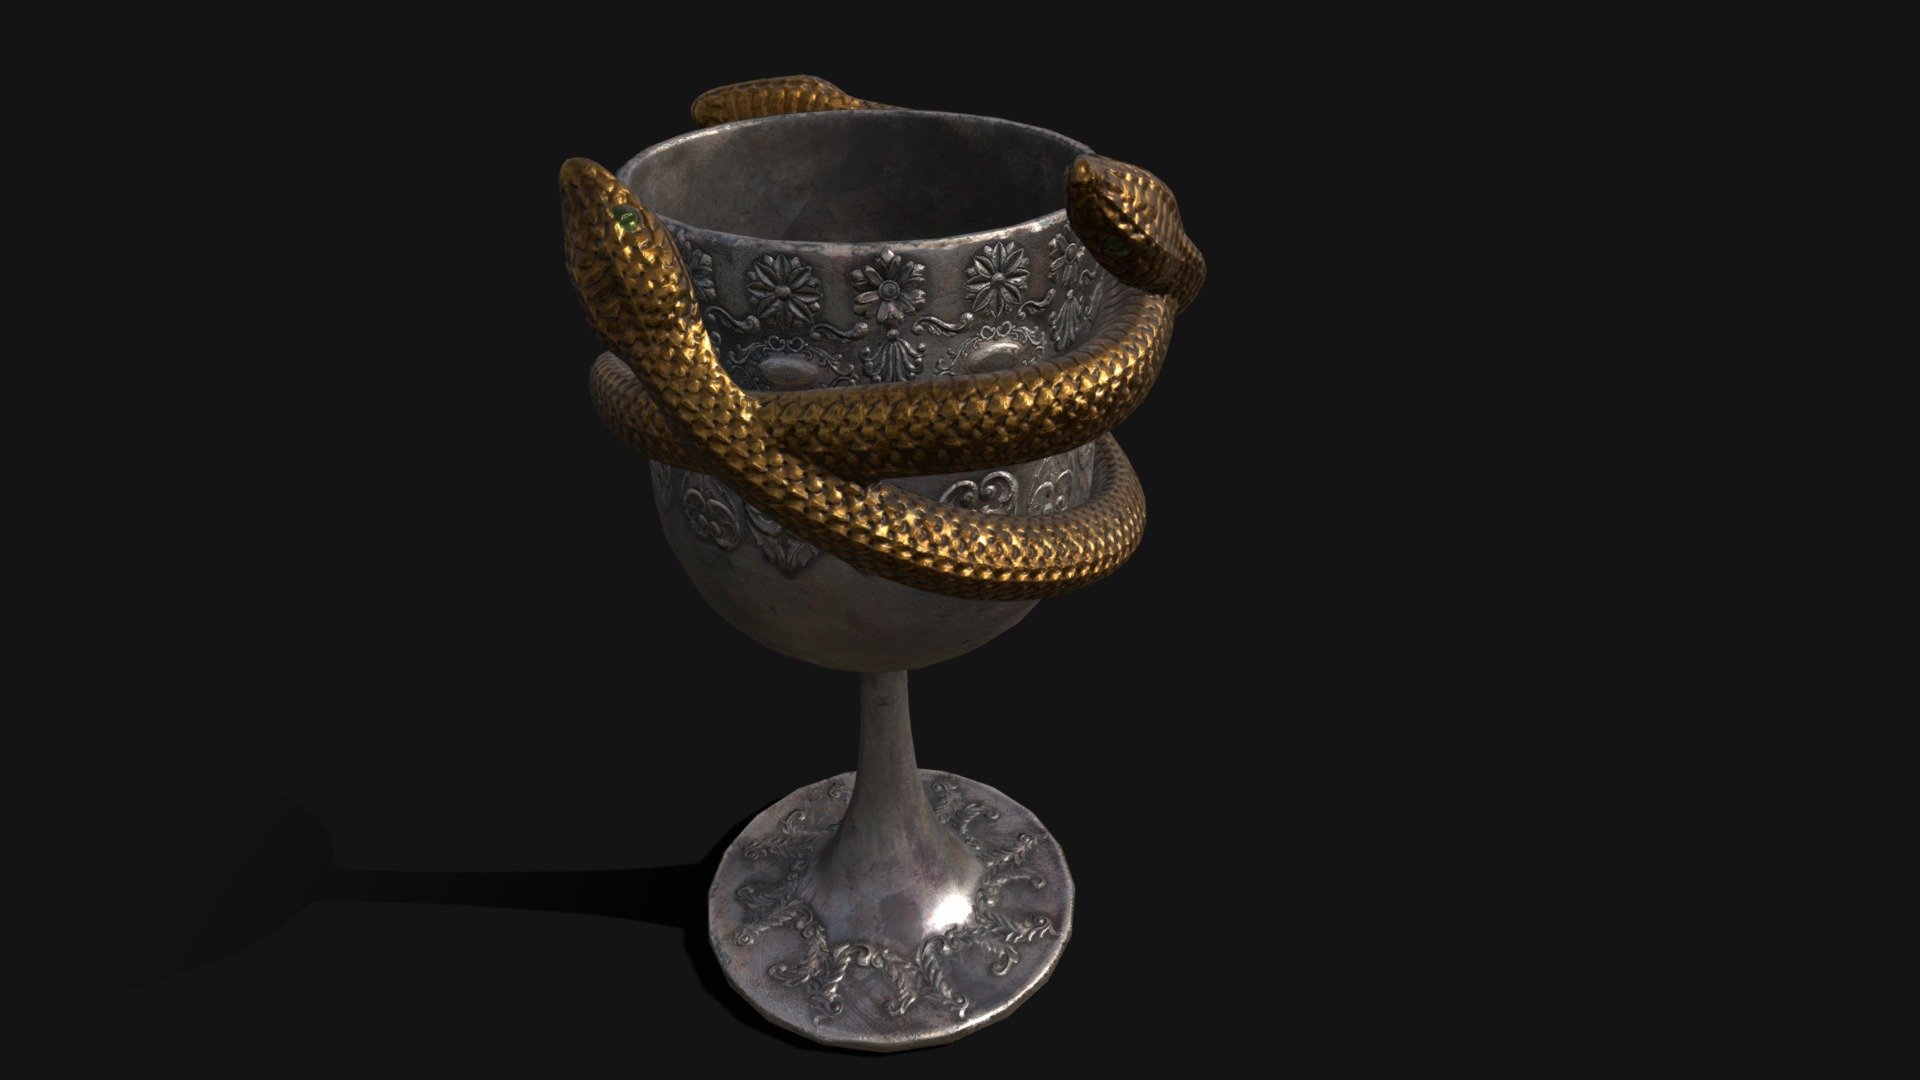 Snake King Chalice 3D Model. This model contains the Snake King Chalice itself 

All modeled in Maya, textured with Substance Painter.

The model was built to scale and is UV unwrapped properly. Contains only one 4K texture set.  

⦁   7156 tris. 

⦁   Contains: .FBX .OBJ and .DAE

⦁   Model has clean topology. No Ngons.

⦁   Built to scale

⦁   Unwrapped UV Map

⦁   4K Texture set

⦁   High quality details

⦁   Based on real life references

⦁   Renders done in Marmoset Toolbag

Polycount: 

Verts 3582

Edges 7178

Faces 3599

Tris 7156

If you have any questions please feel free to ask me 3d model